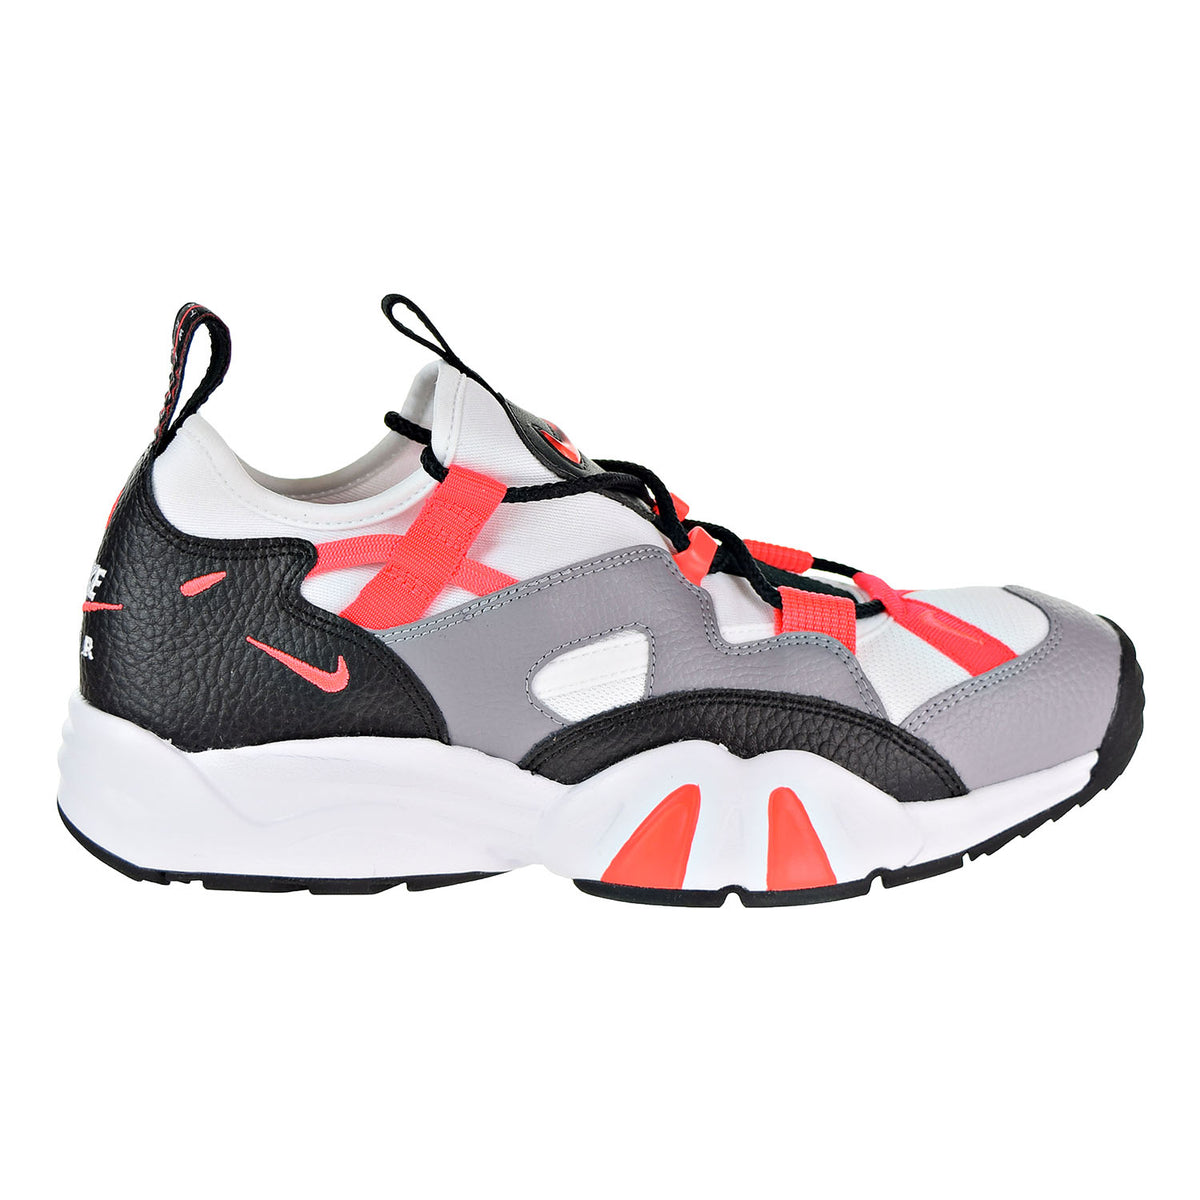 Air Men's Shoes Cement Grey/Infrared/Black